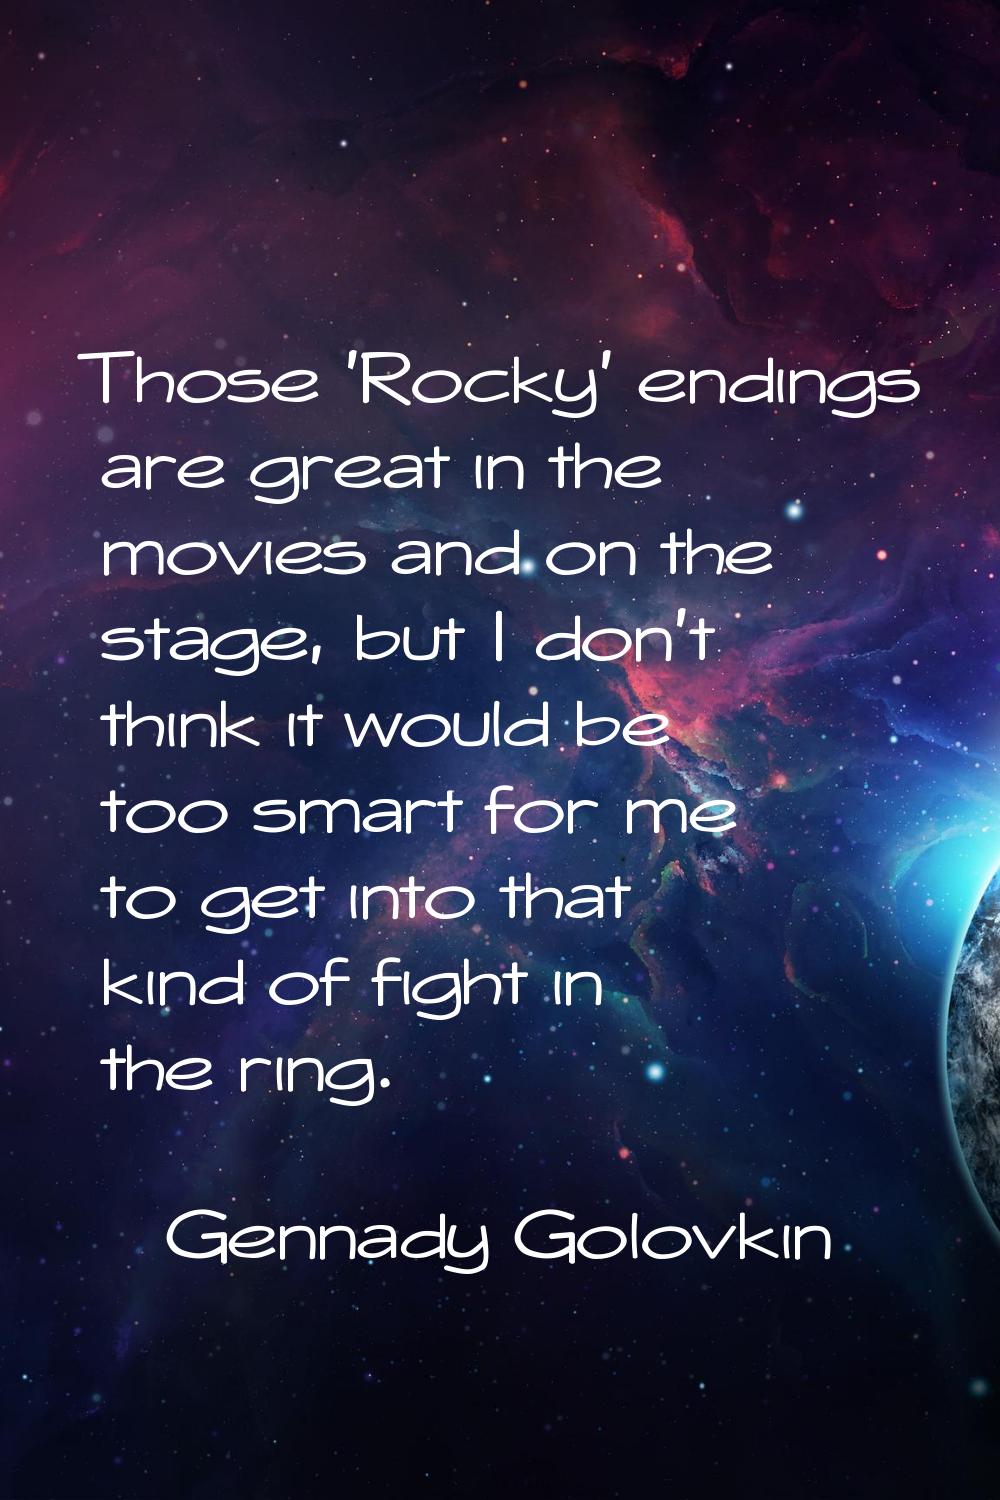 Those 'Rocky' endings are great in the movies and on the stage, but I don't think it would be too s